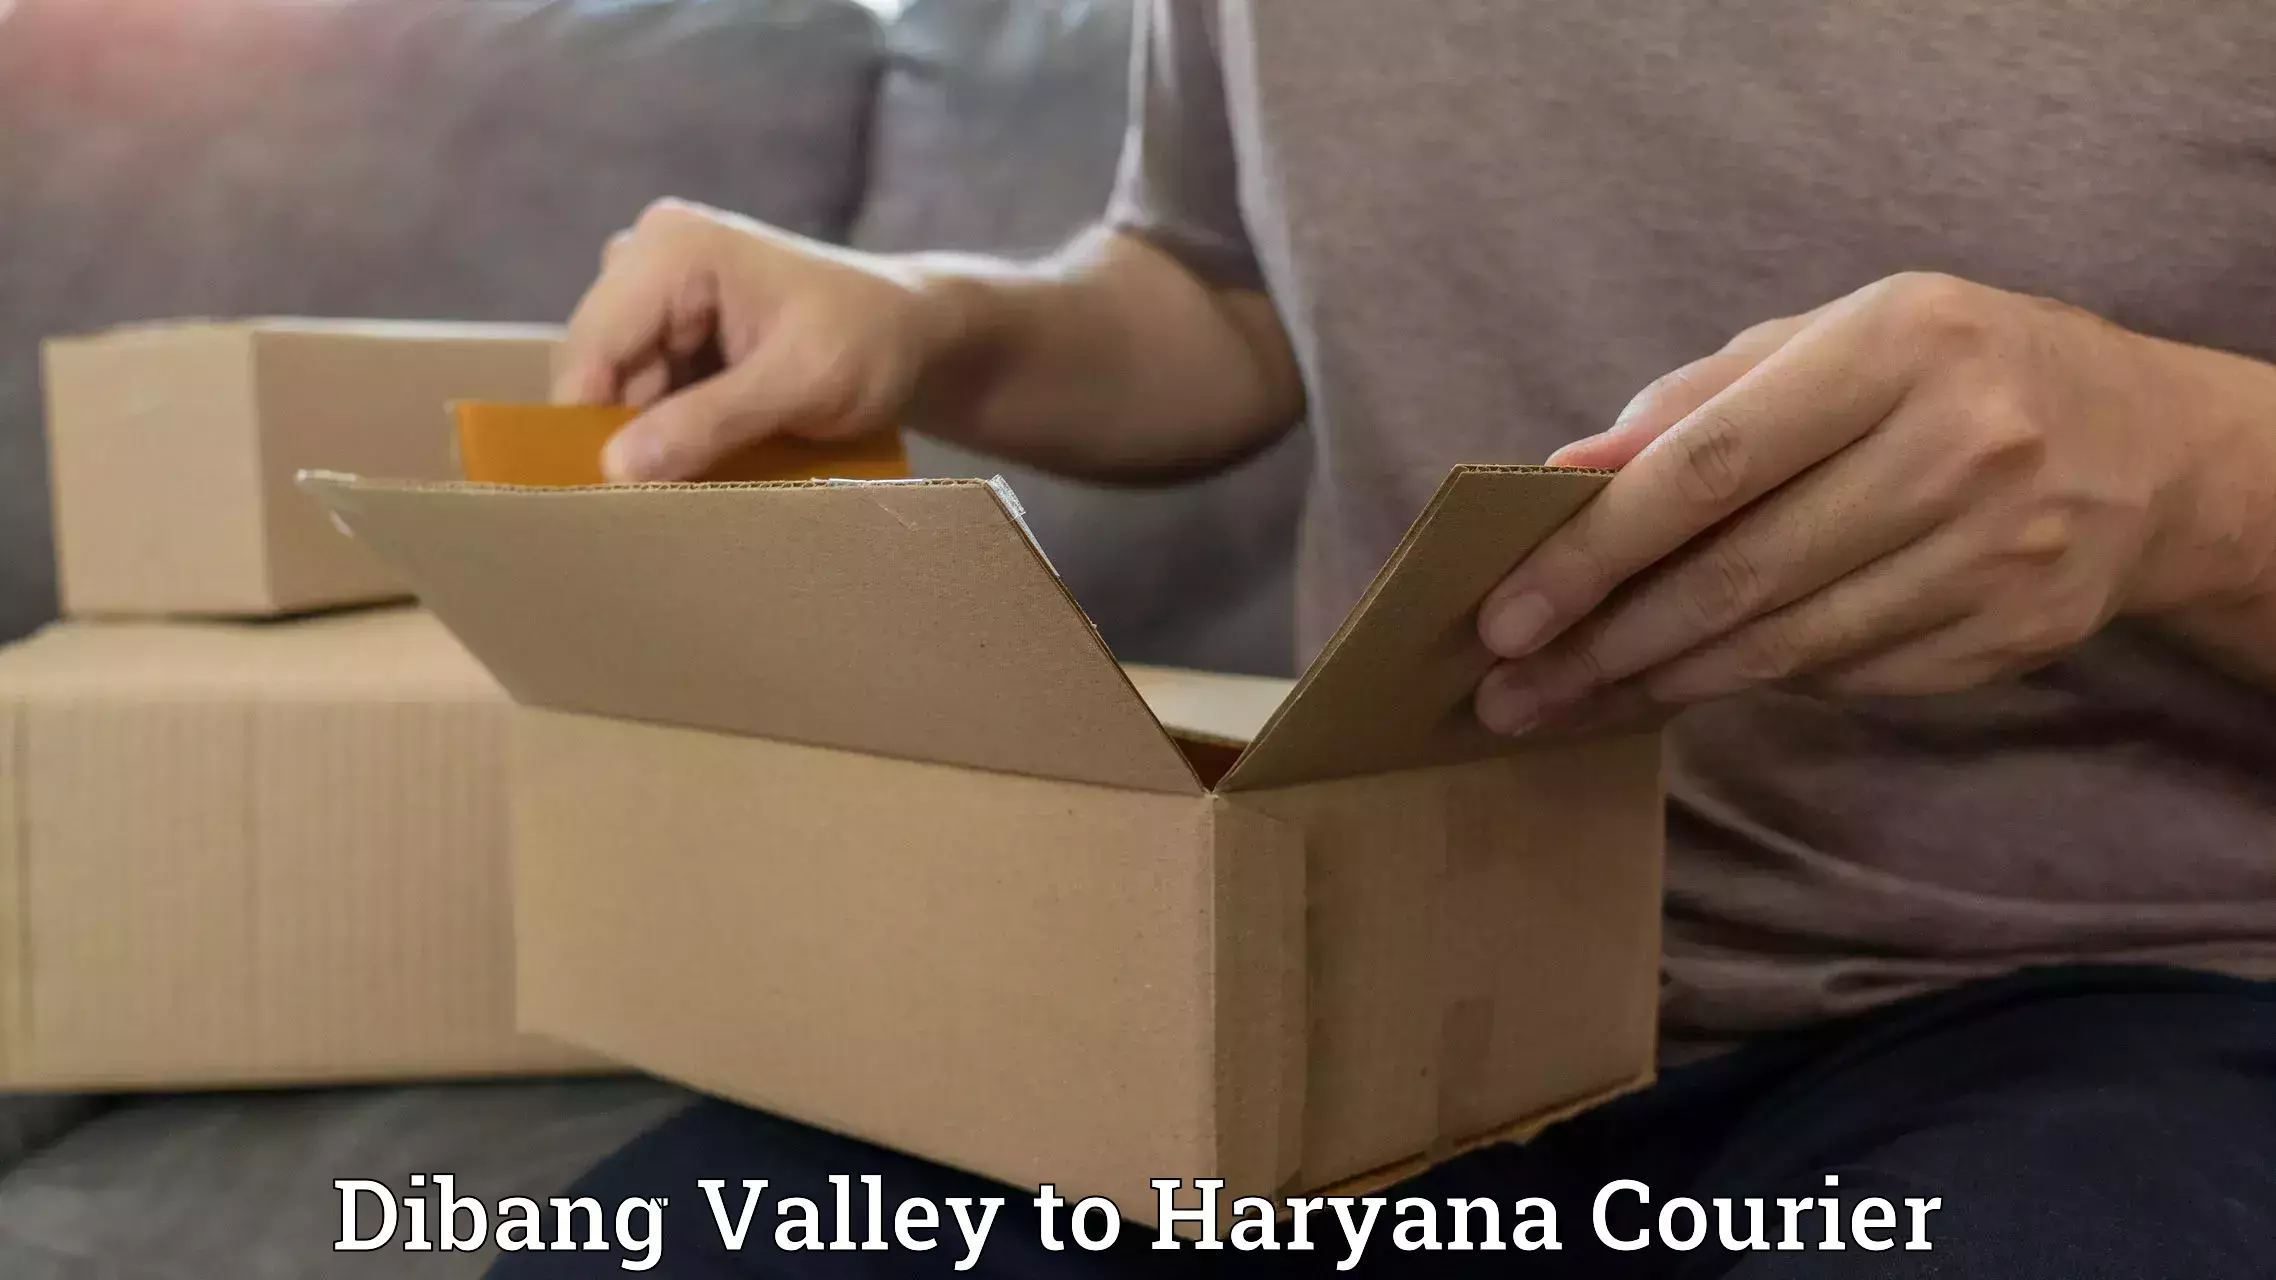 Modern courier technology Dibang Valley to NCR Haryana